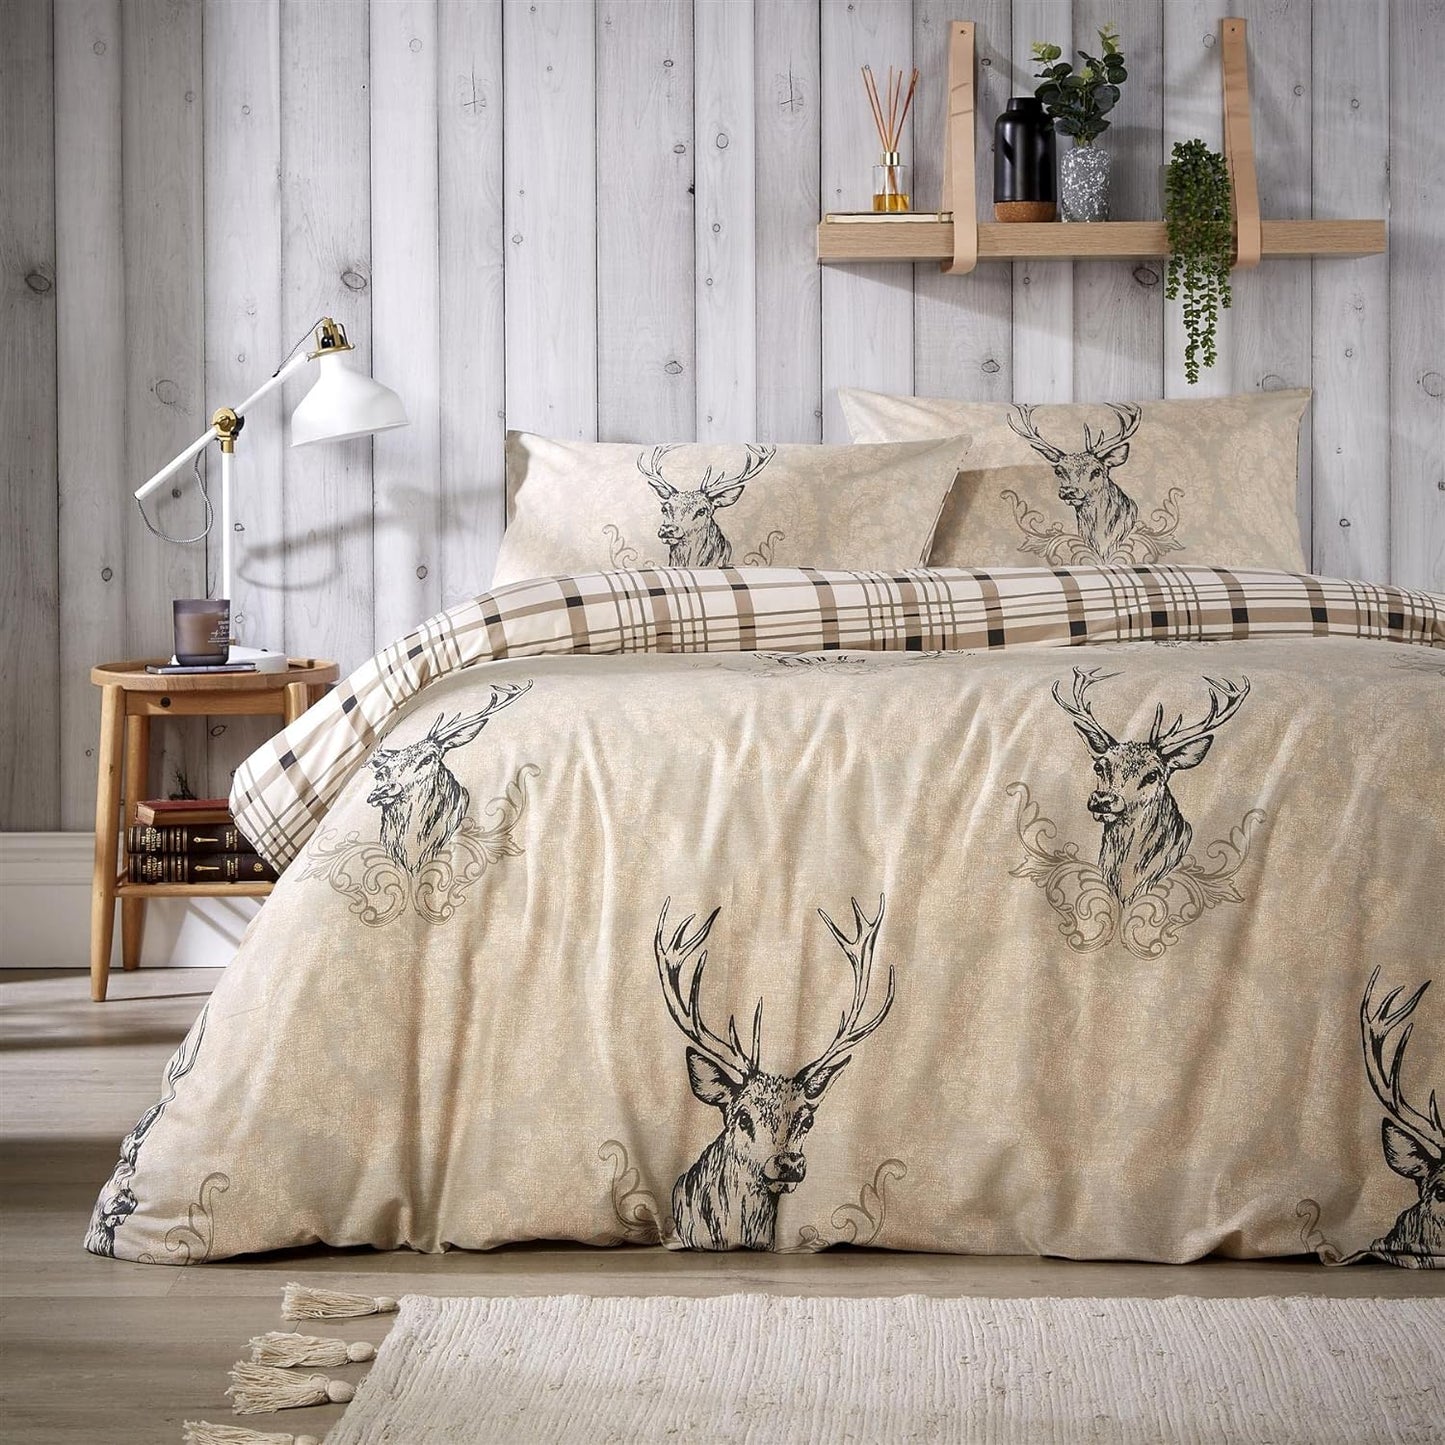 Highland Stag Reversible Duvet Cover Quilt Bedding 3 Pcs Set With Matching Pillowcase Polycotton